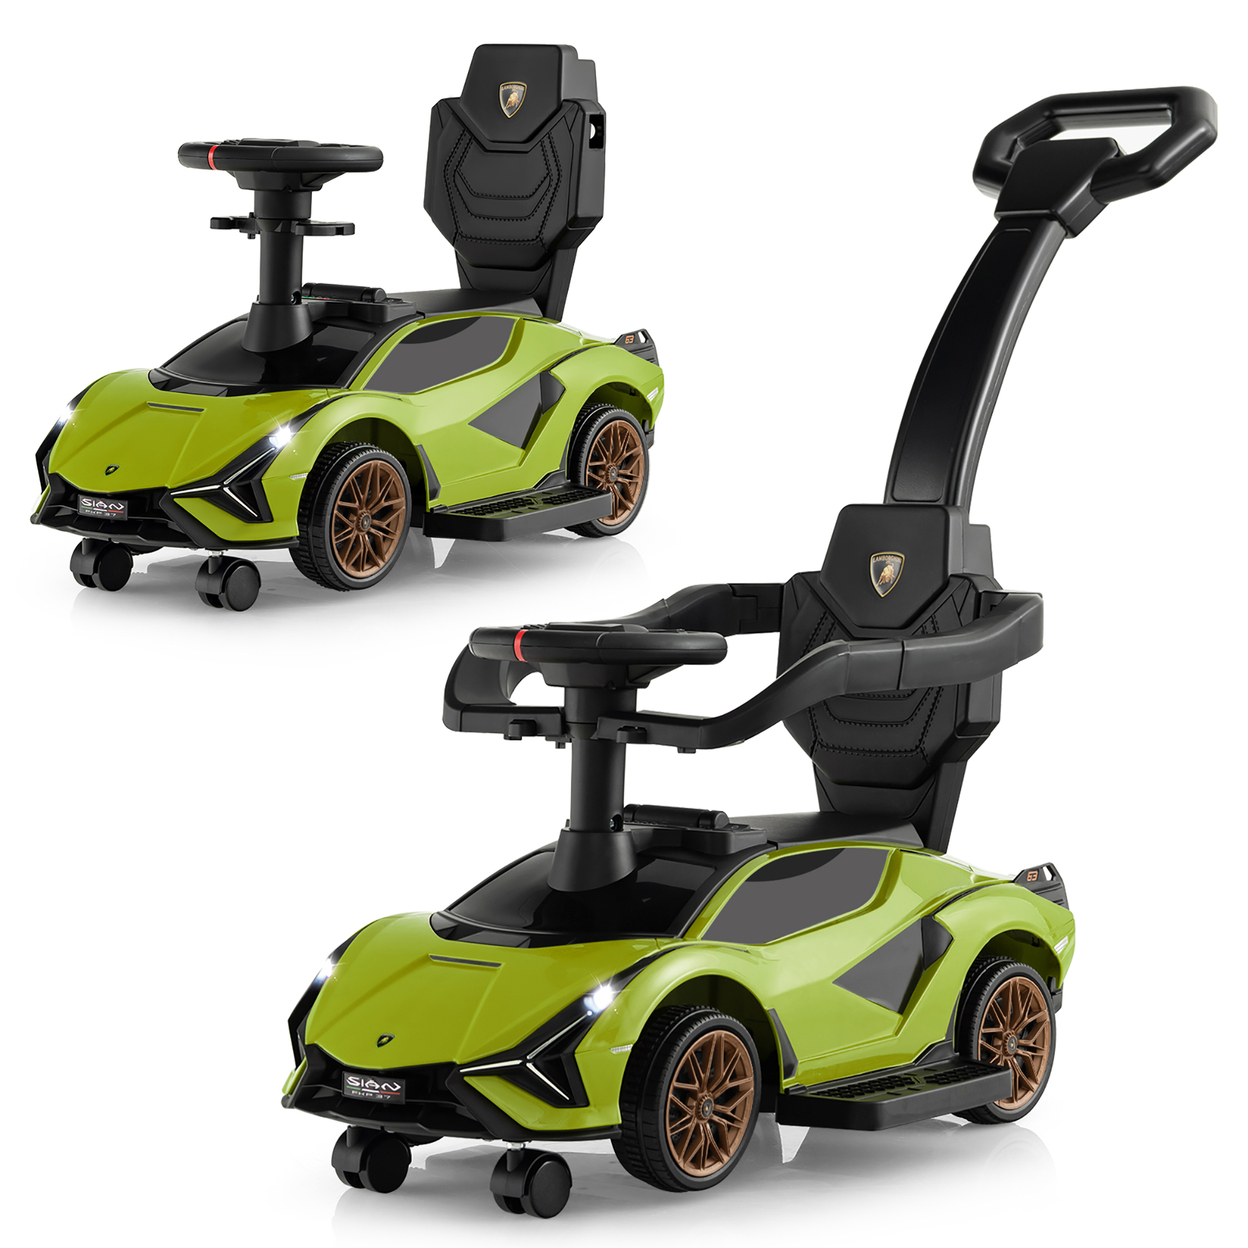 3-in-1 Licensed Lamborghini Ride On Push Car Walking Toy Stroller With USB Port - Green